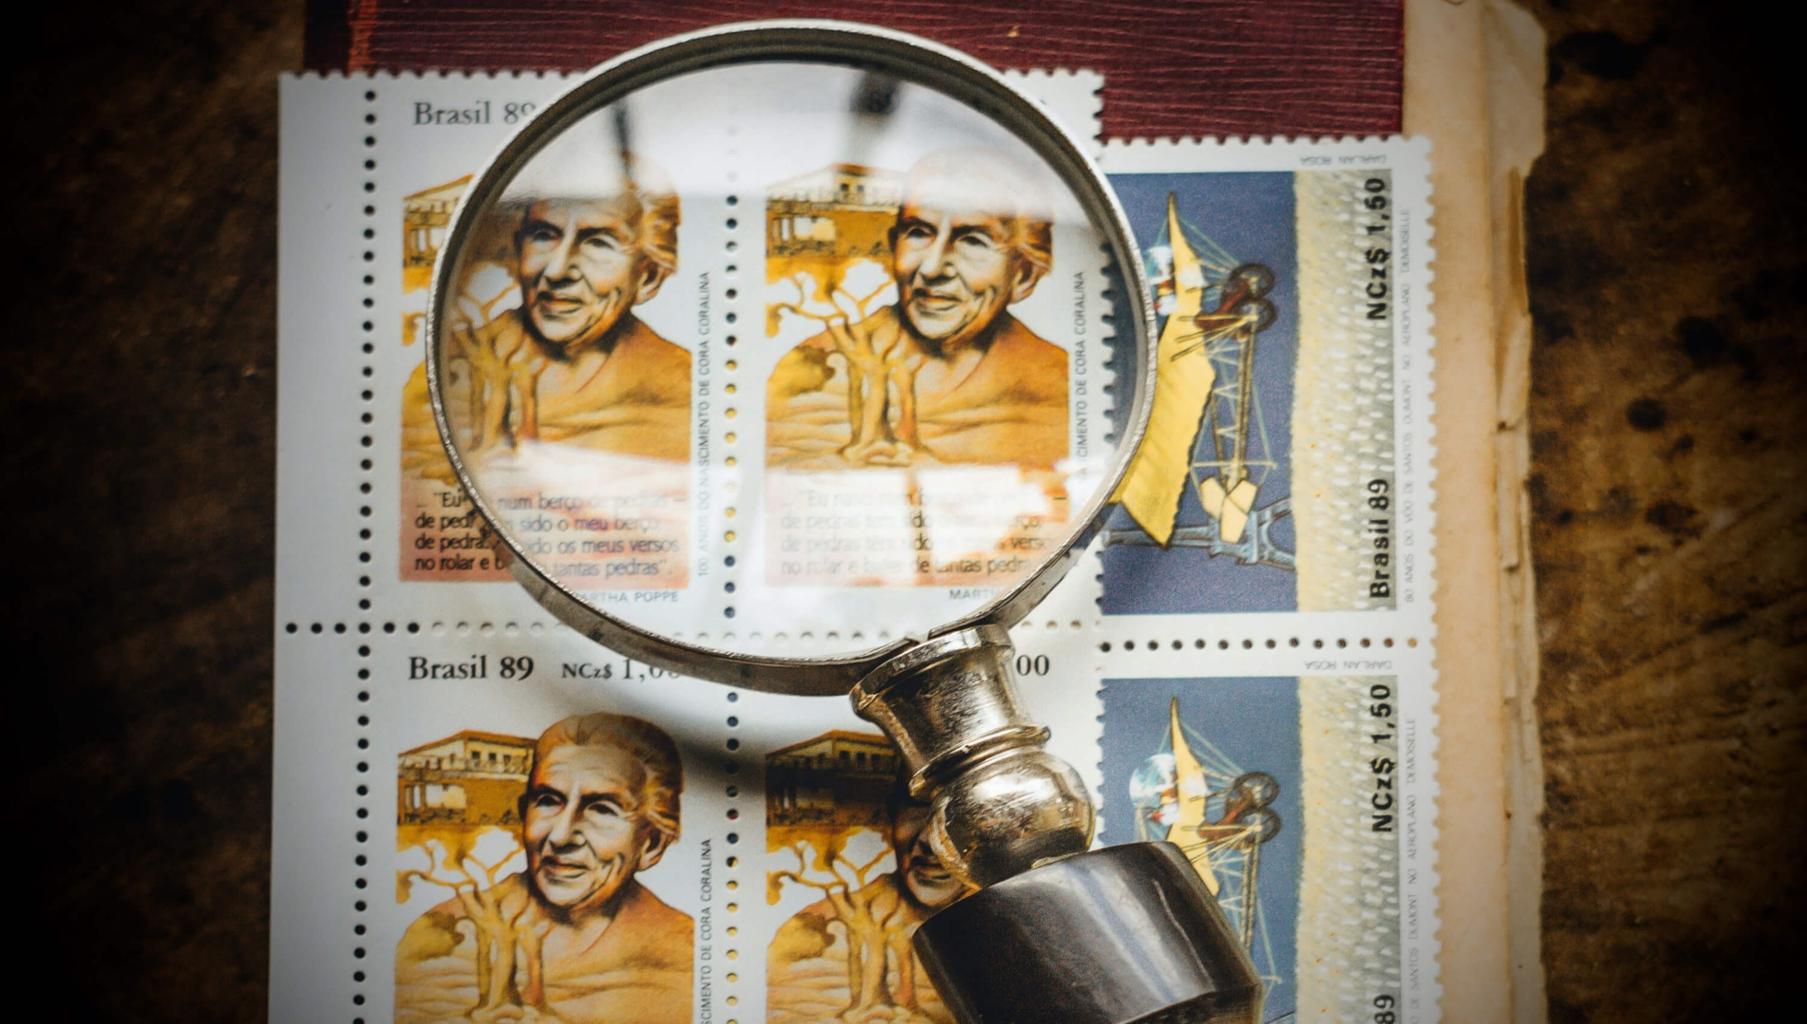 Magnifying glass with old vintage book and brazilian stamps. Photo by Koala on Unsplash.